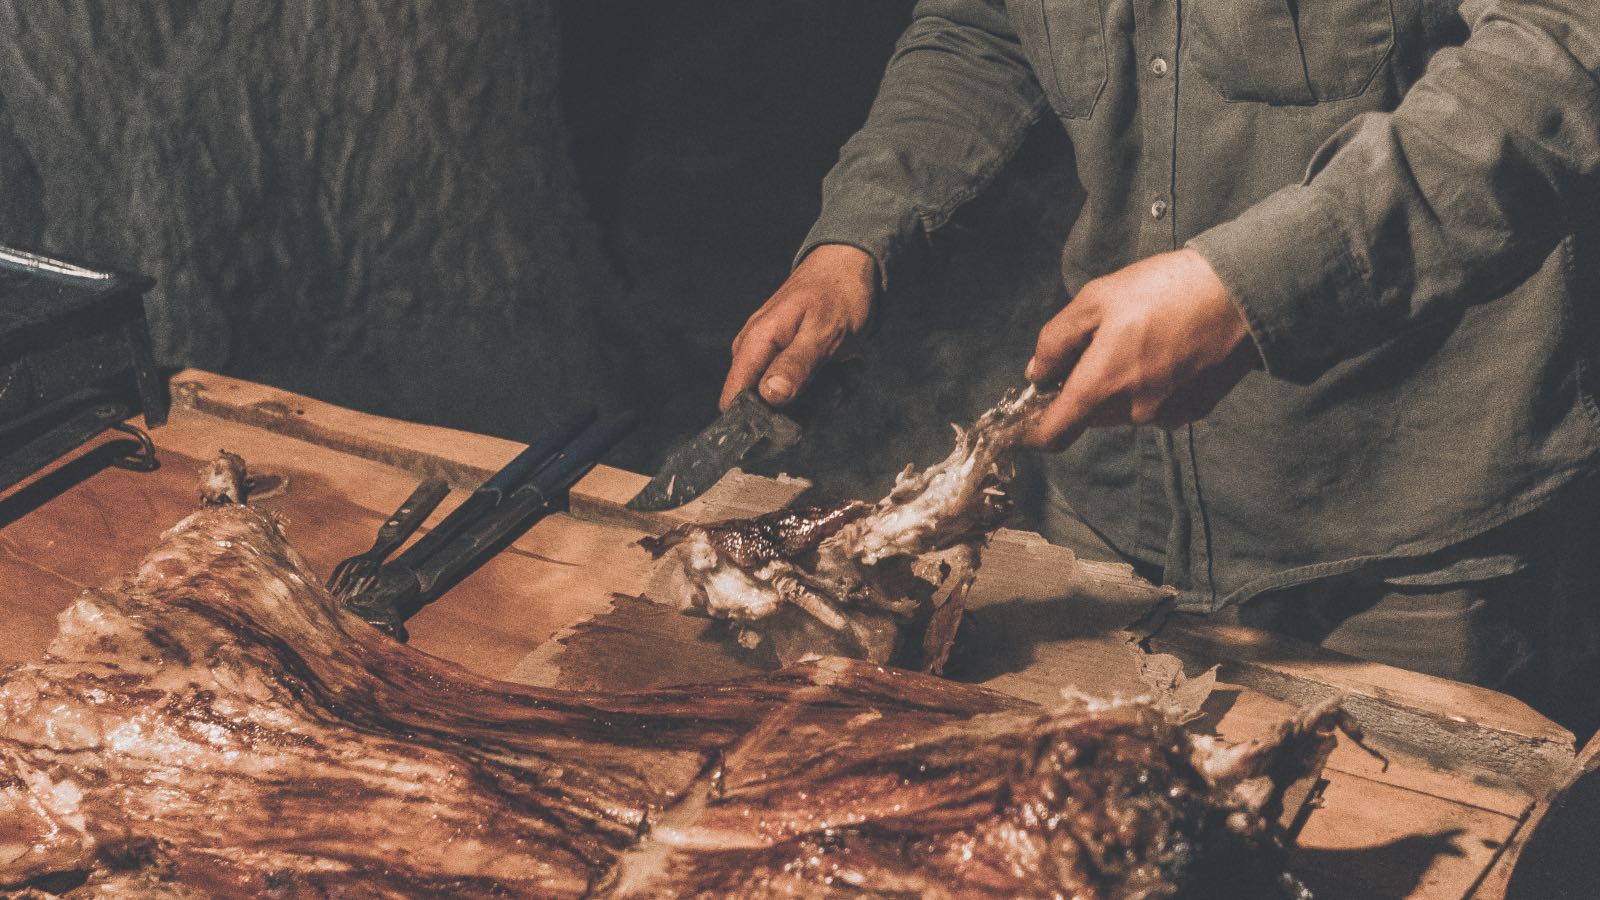 The High Art of Argentine Grilling